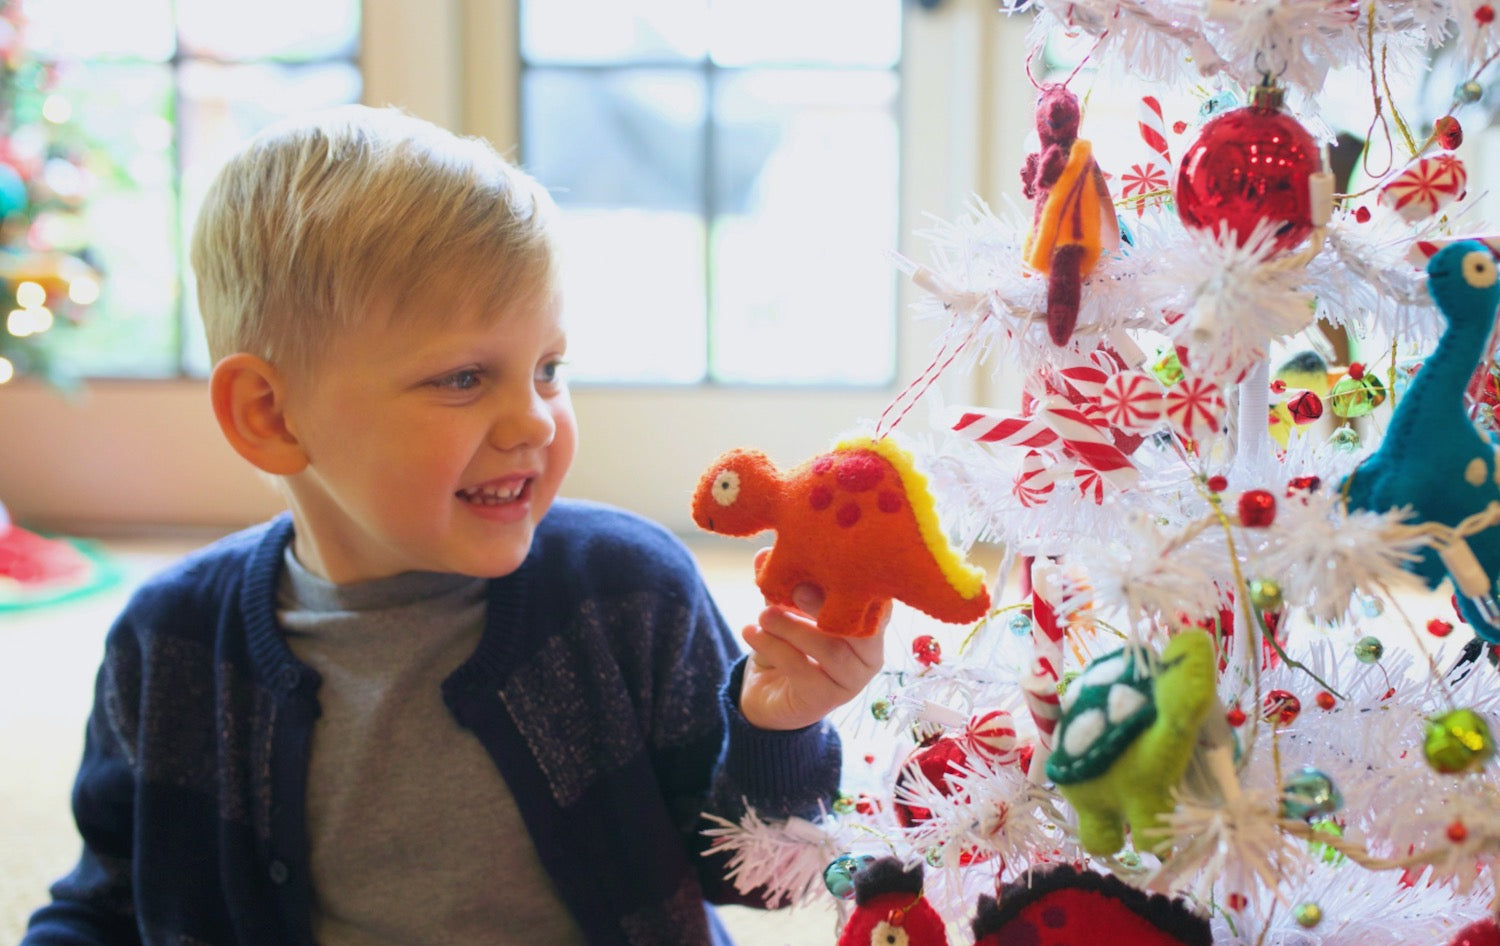 Little Boy Looking at Christmas Tree full of cute Ornaments 4 Orphans